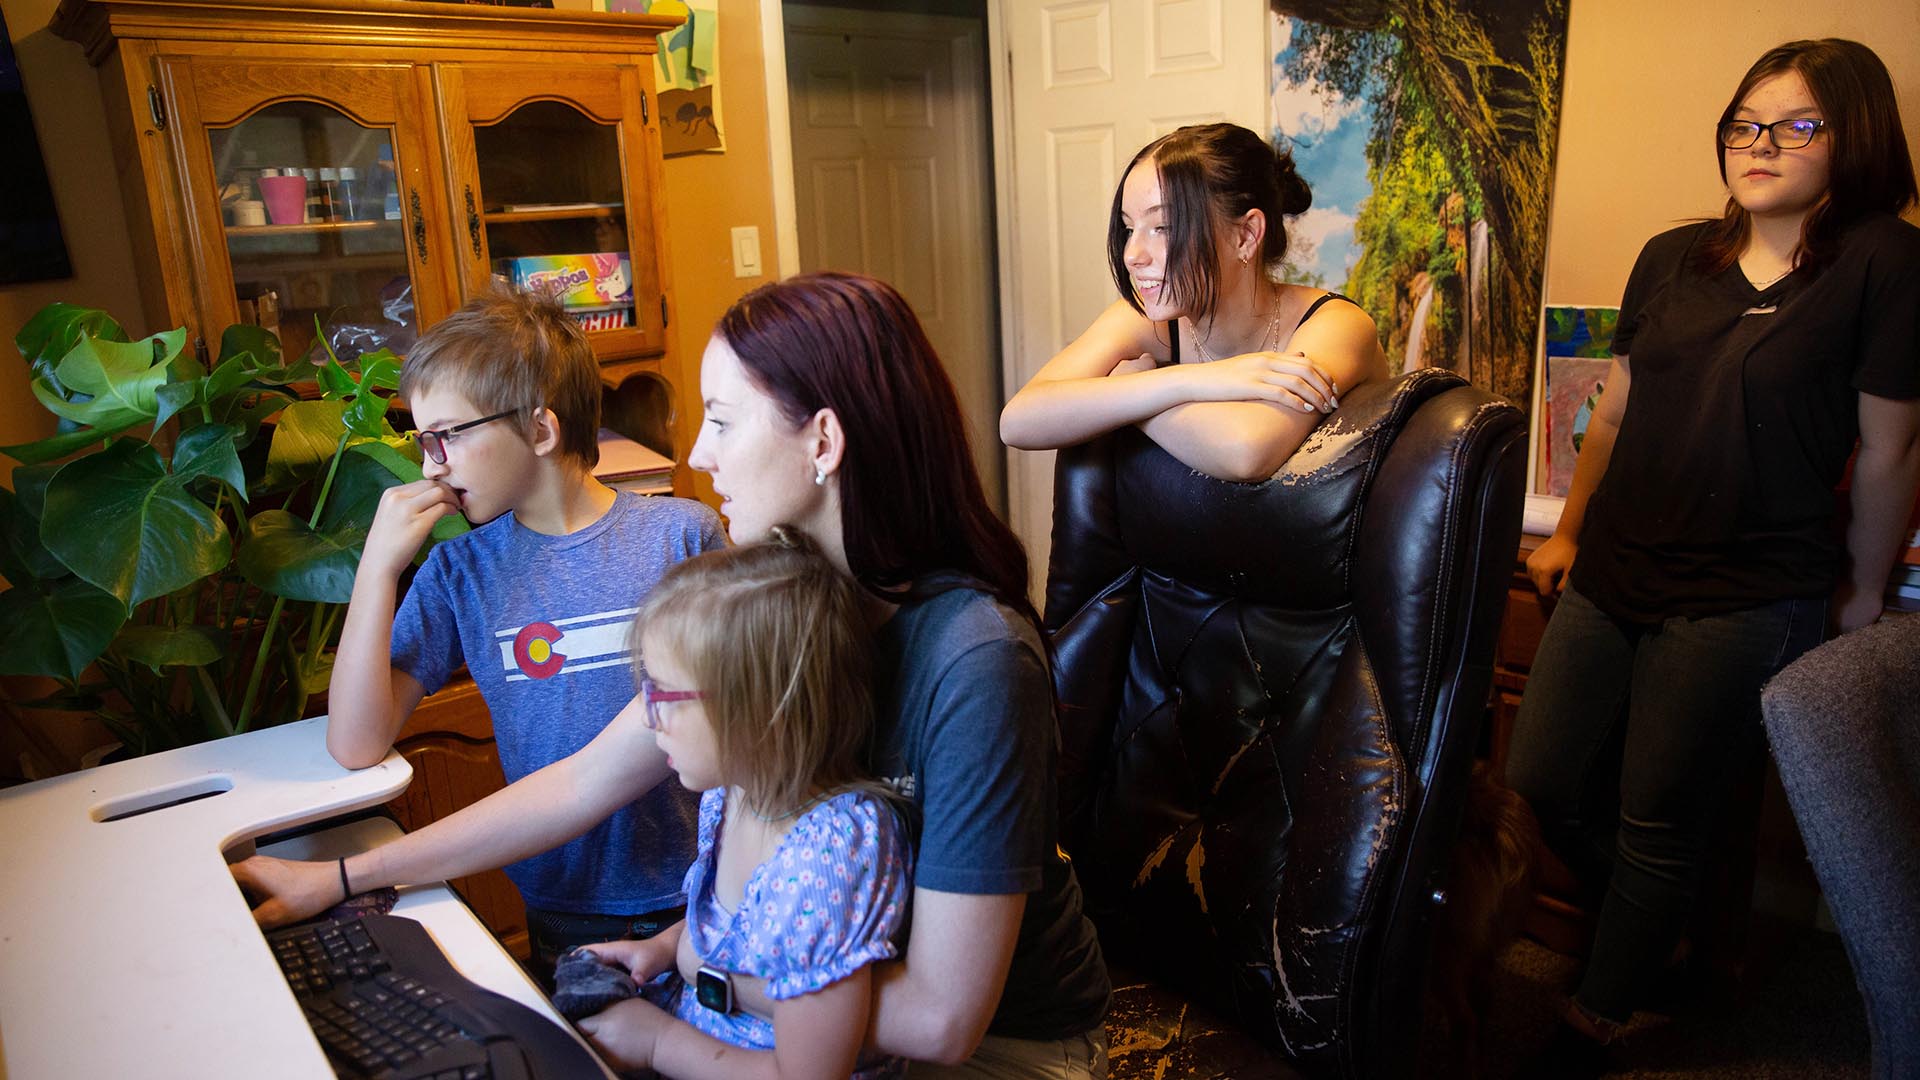 MSU Denver student Heidi Keryan at home with her children from left to right Stefan, Phoenix, Sativa and Gabriella.